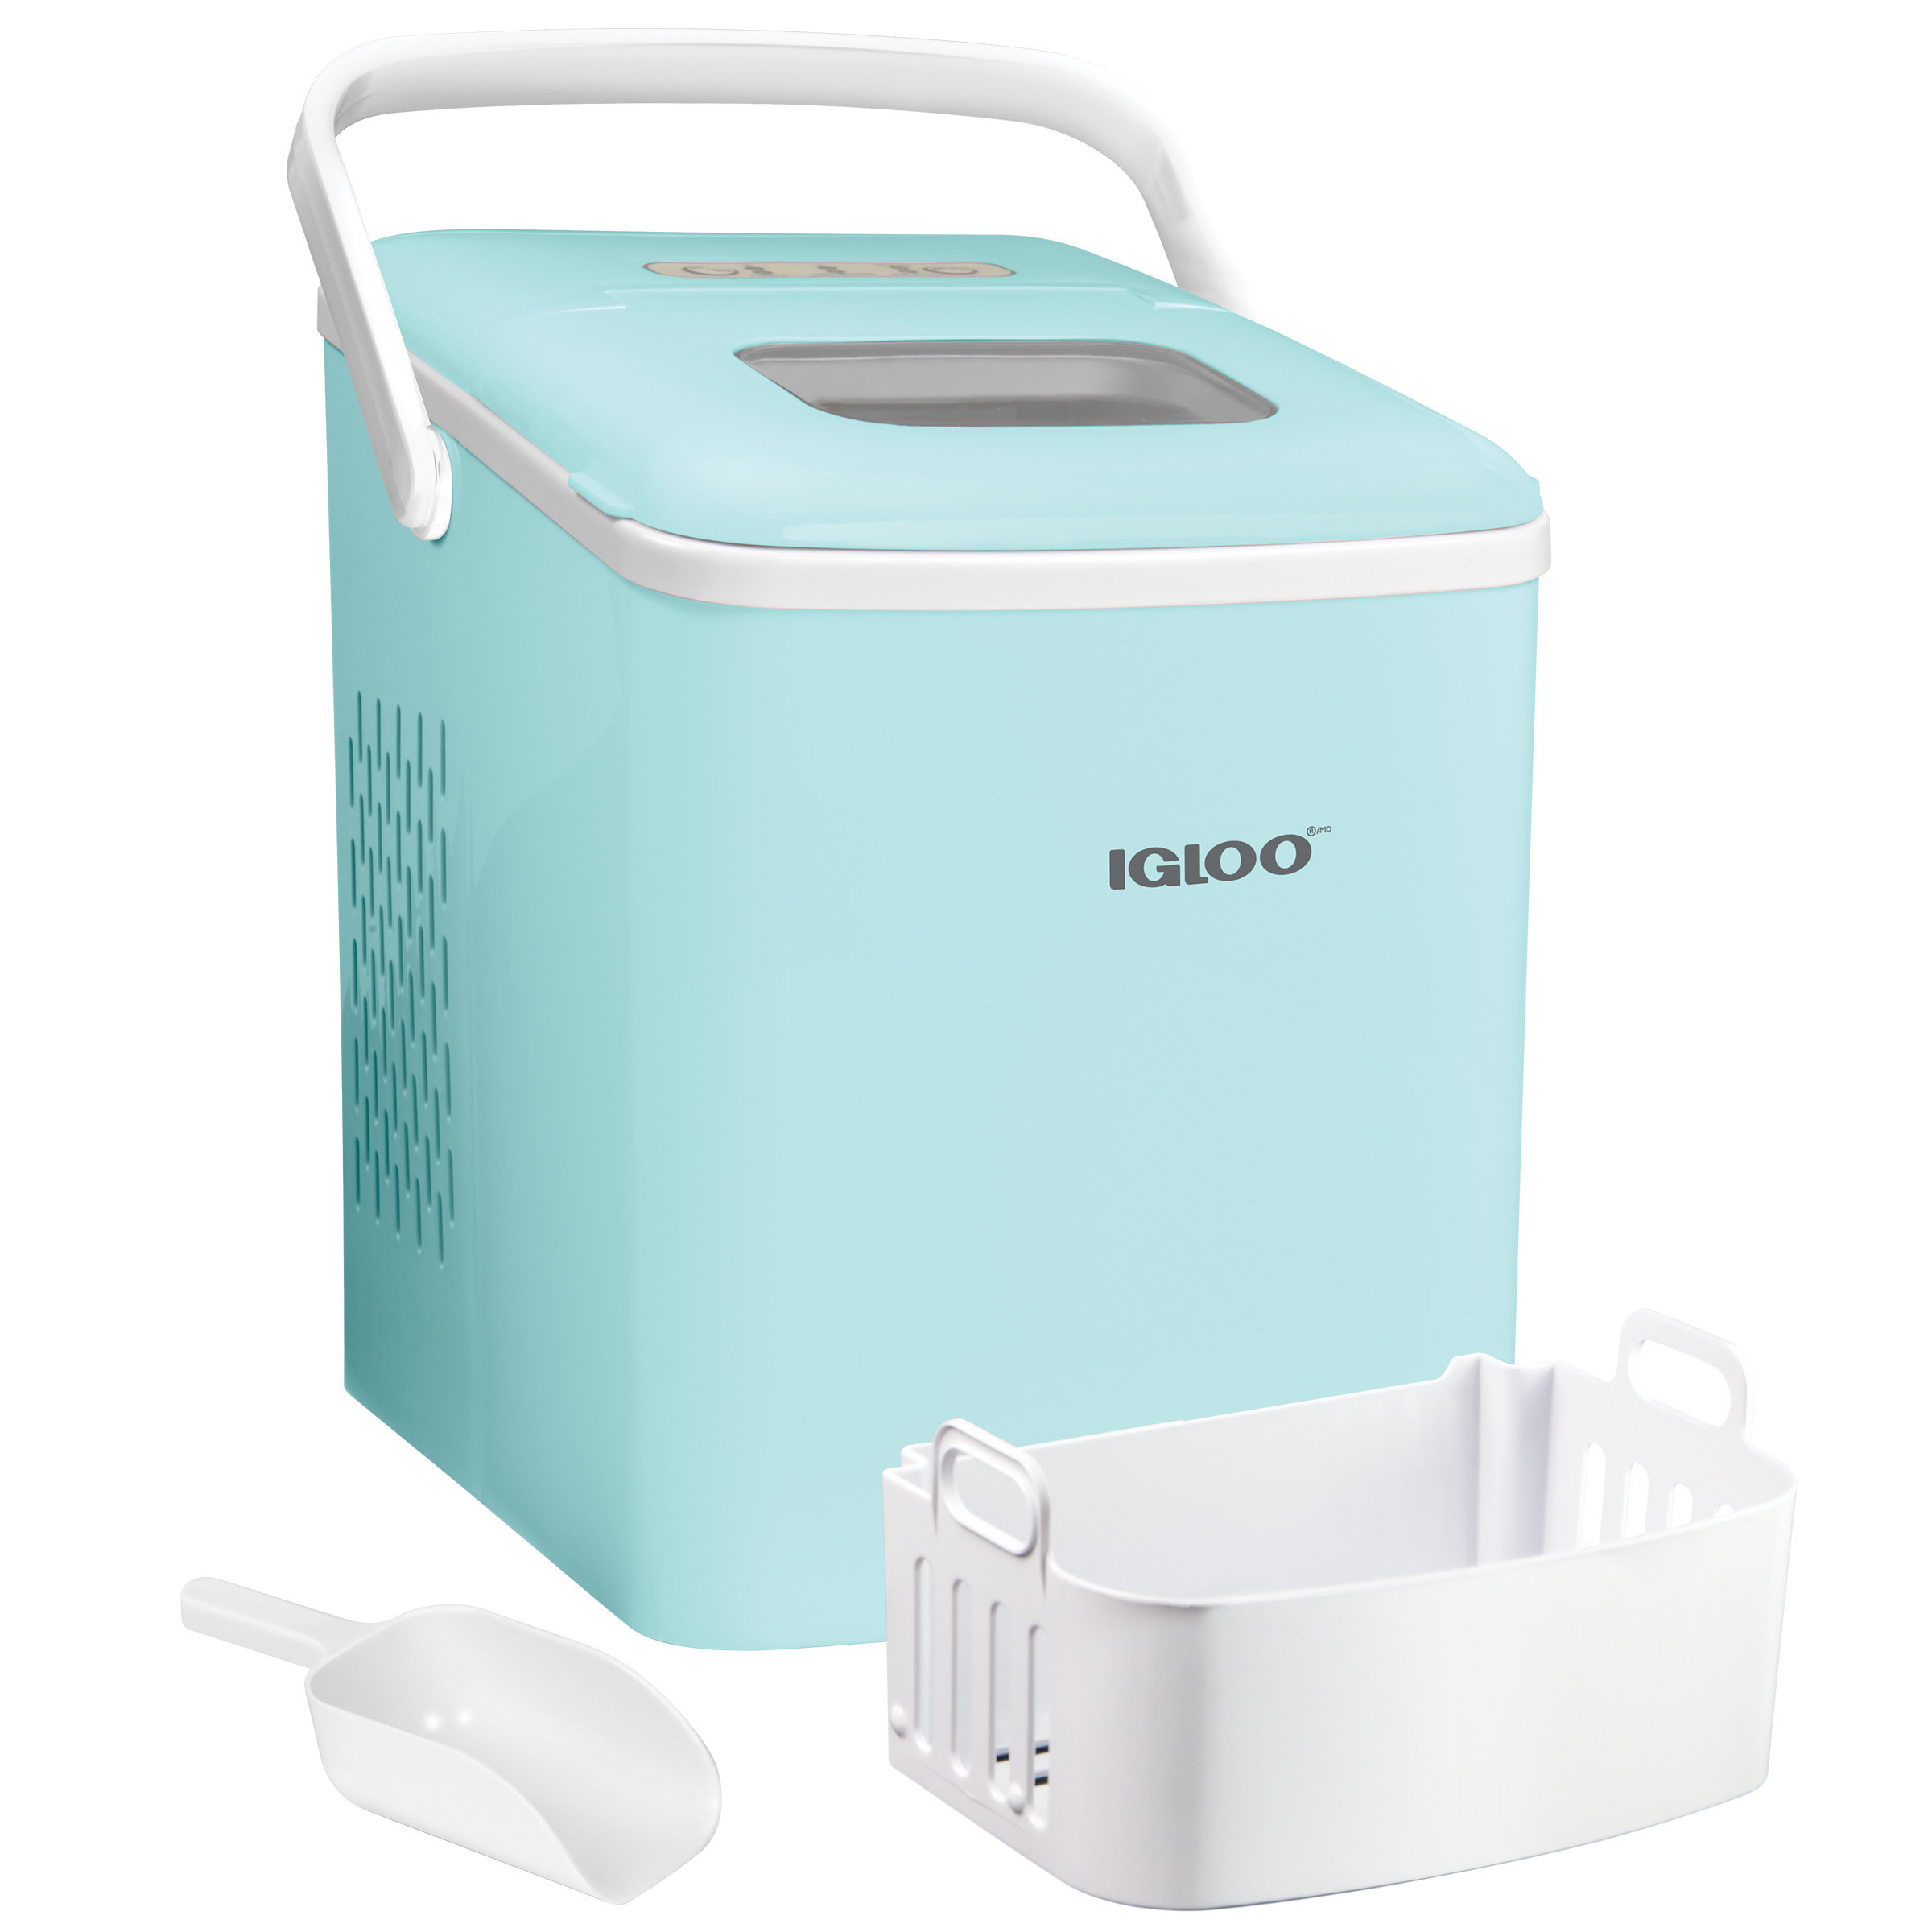 Igloo Automatic Self-Cleaning Portable Electric Countertop Ice Maker Machine With Handle, 26 Pounds In 24 Hours, 9 Ice Cubes Ready In 7 Minutes, With